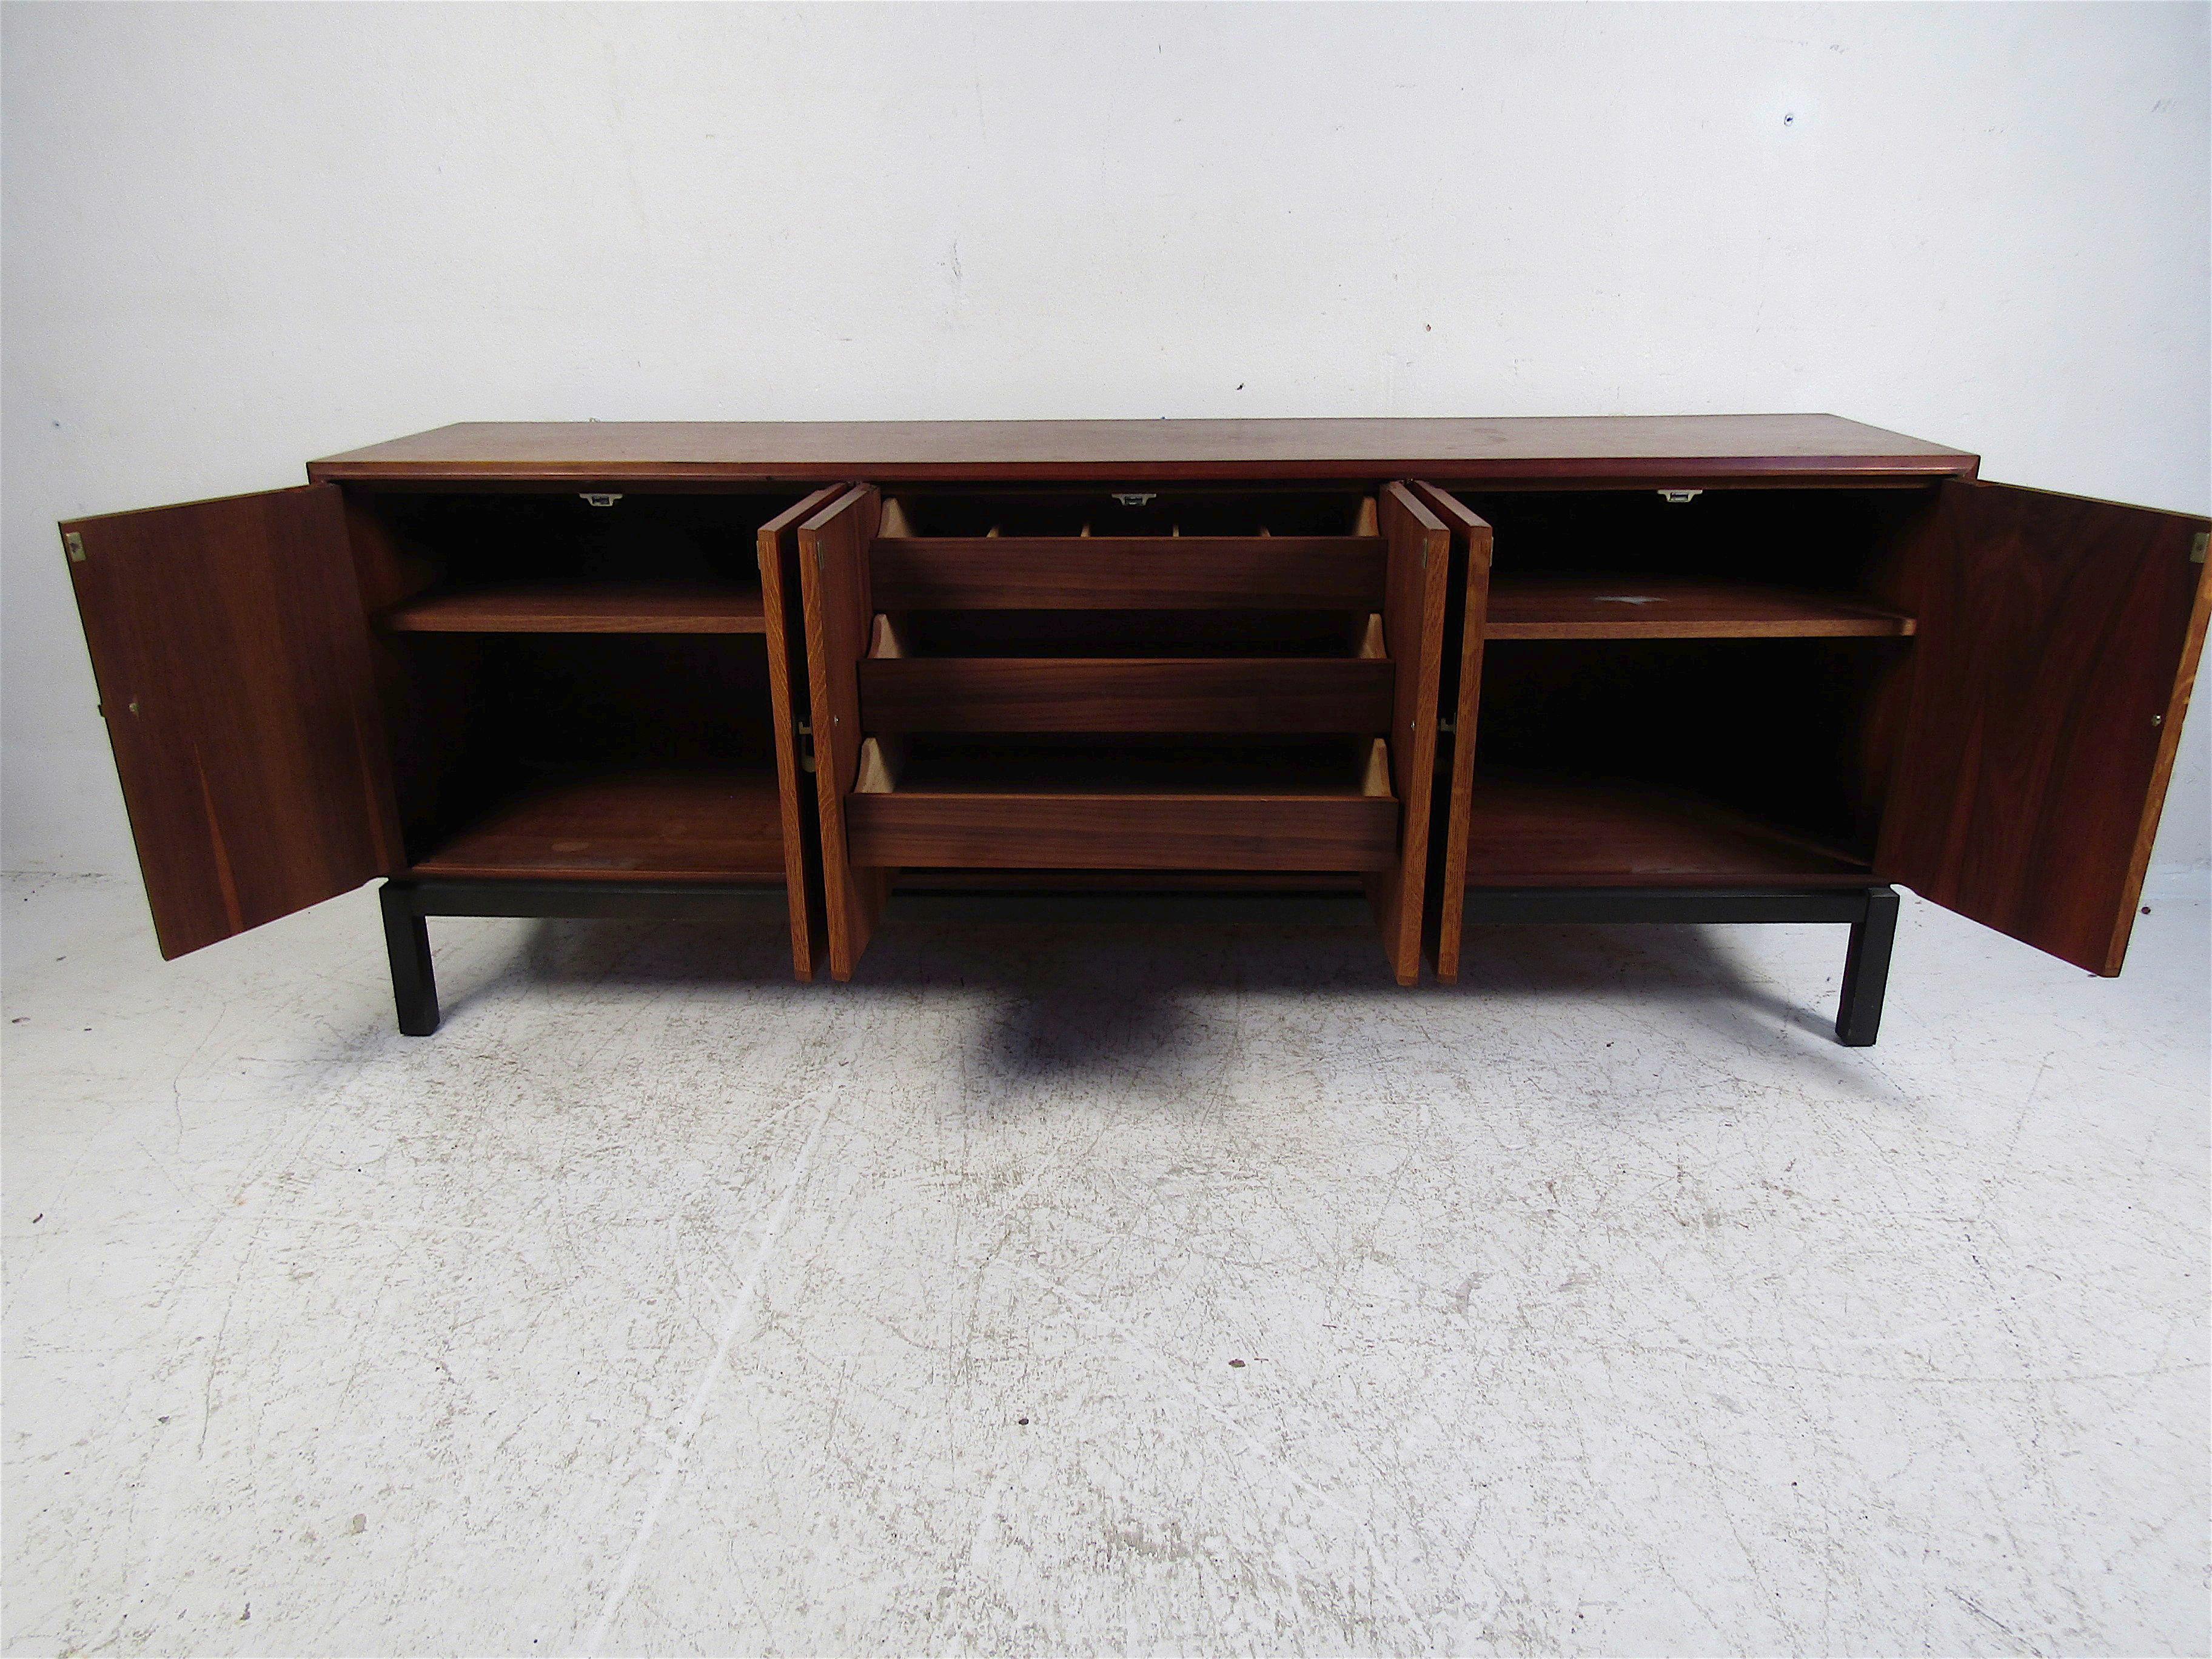 jack cartwright founders credenza